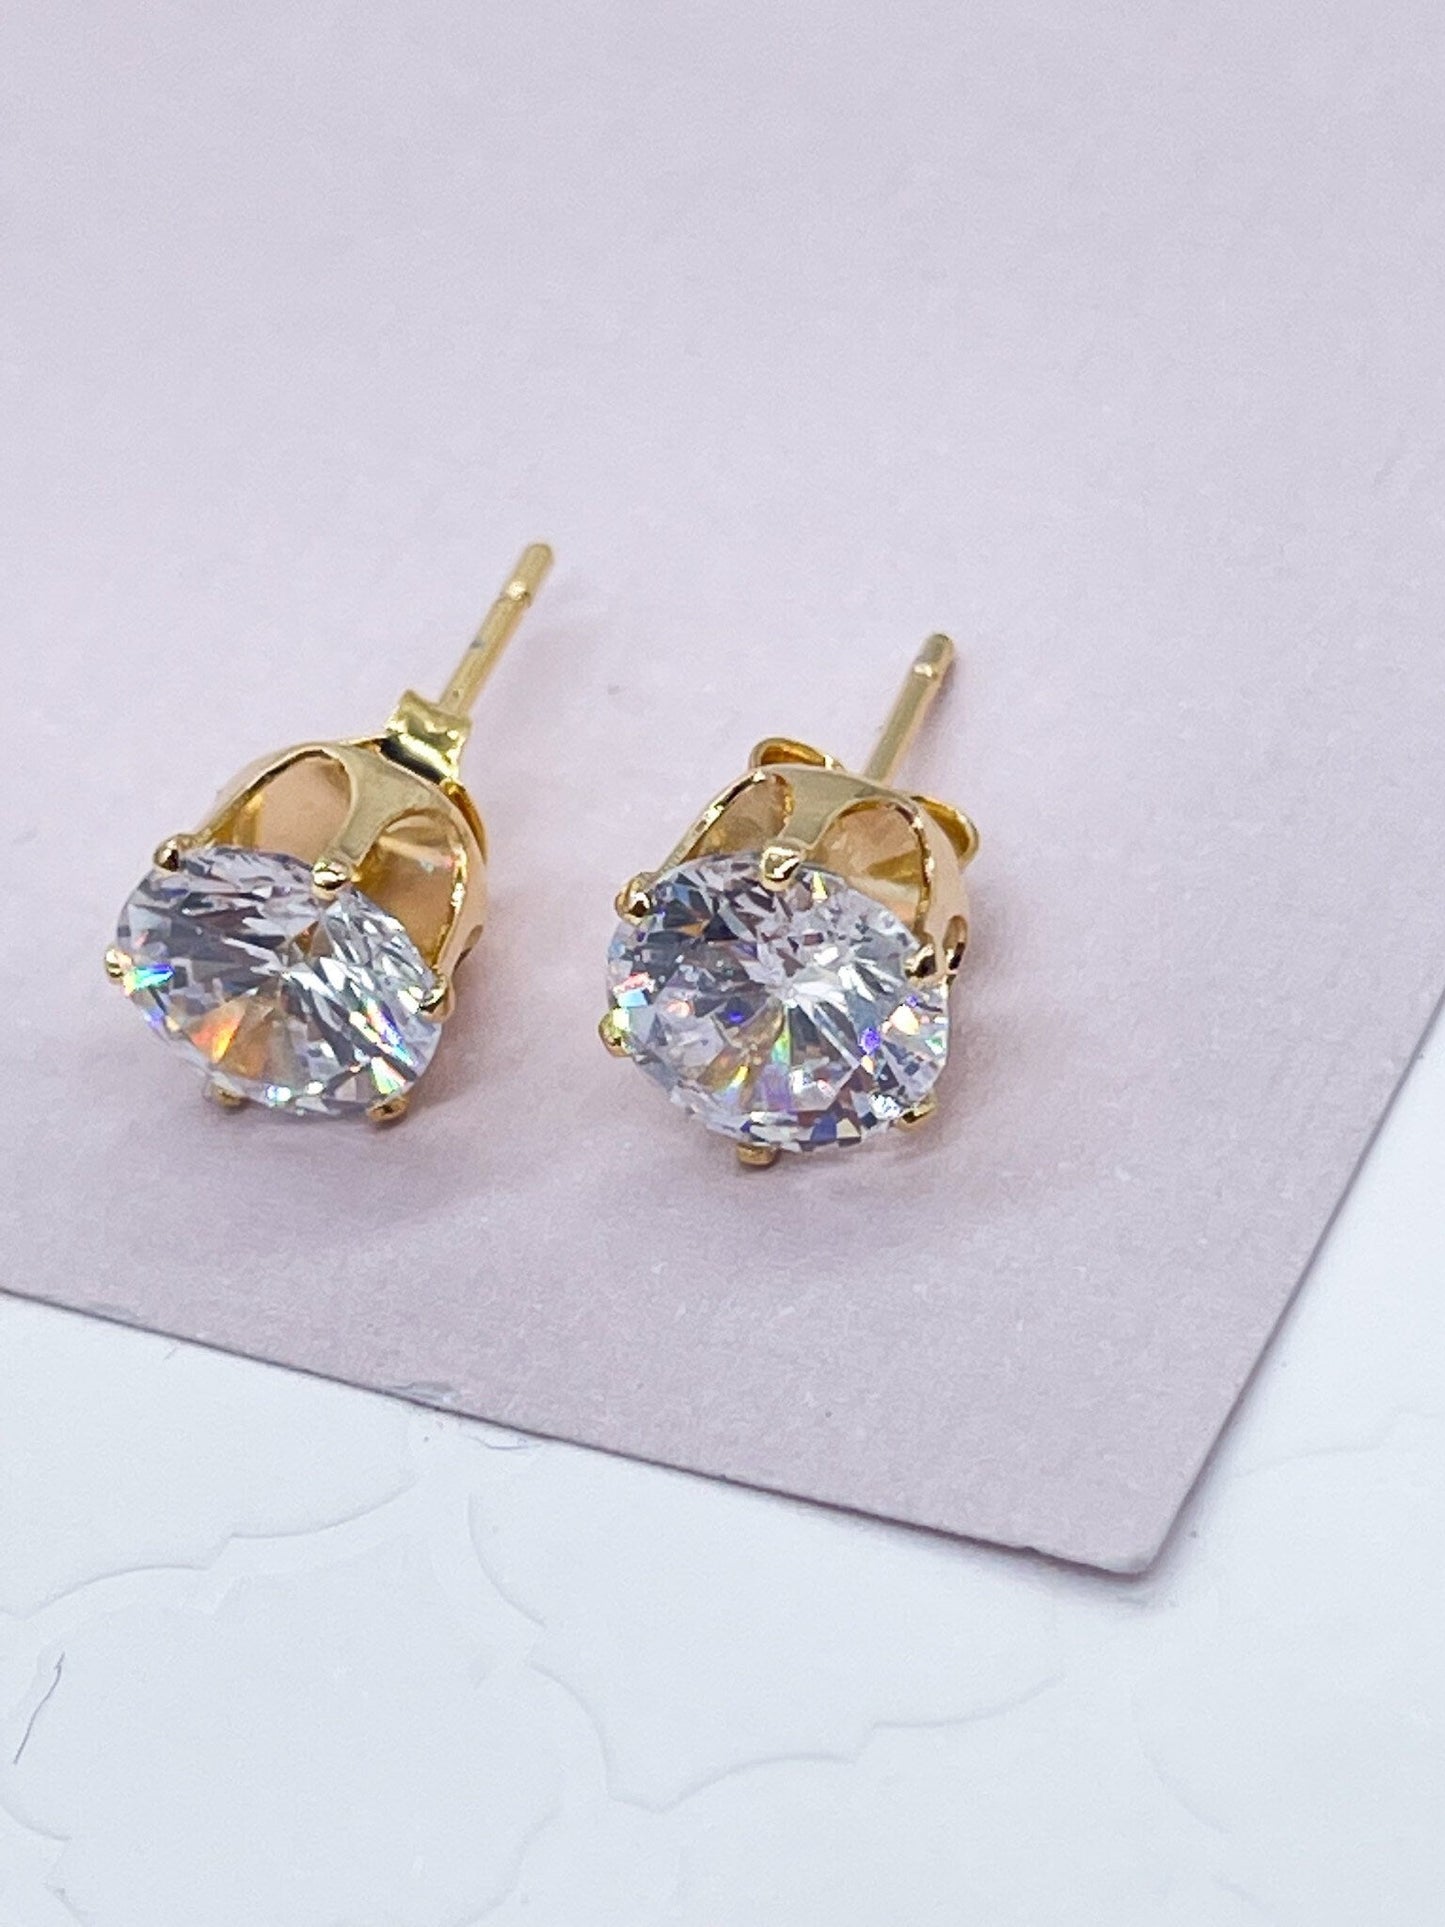 18k Gold Layered 8mm Cubic Zirconia Round Stud Earrings Crown Settings